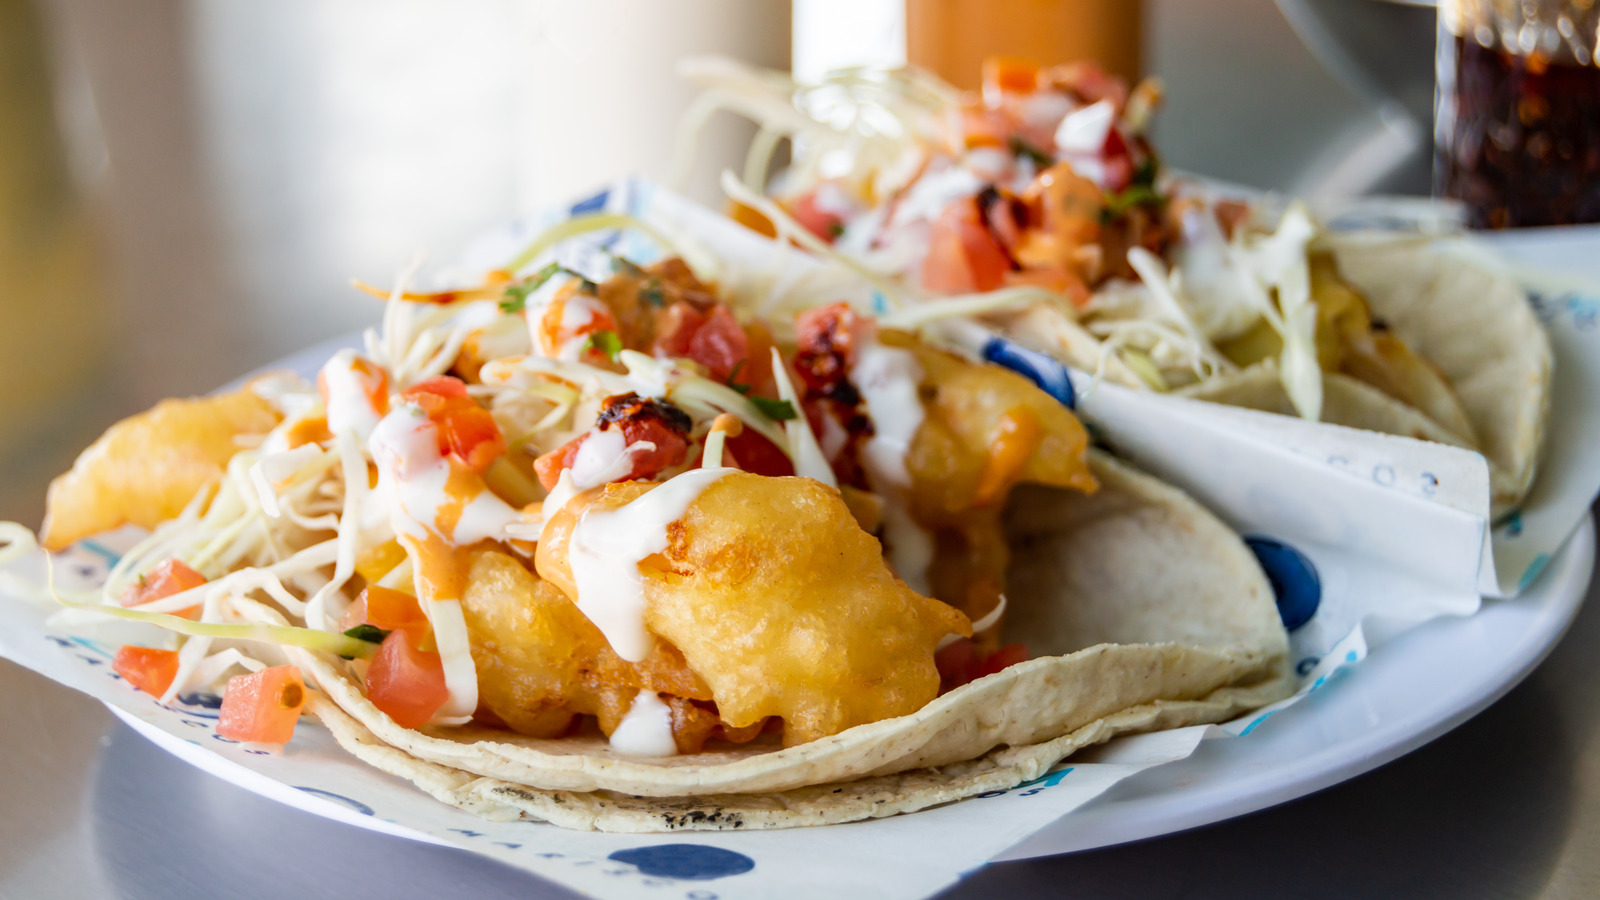 Baja-Style Fish Tacos Are The Unofficial Dish Of San Diego